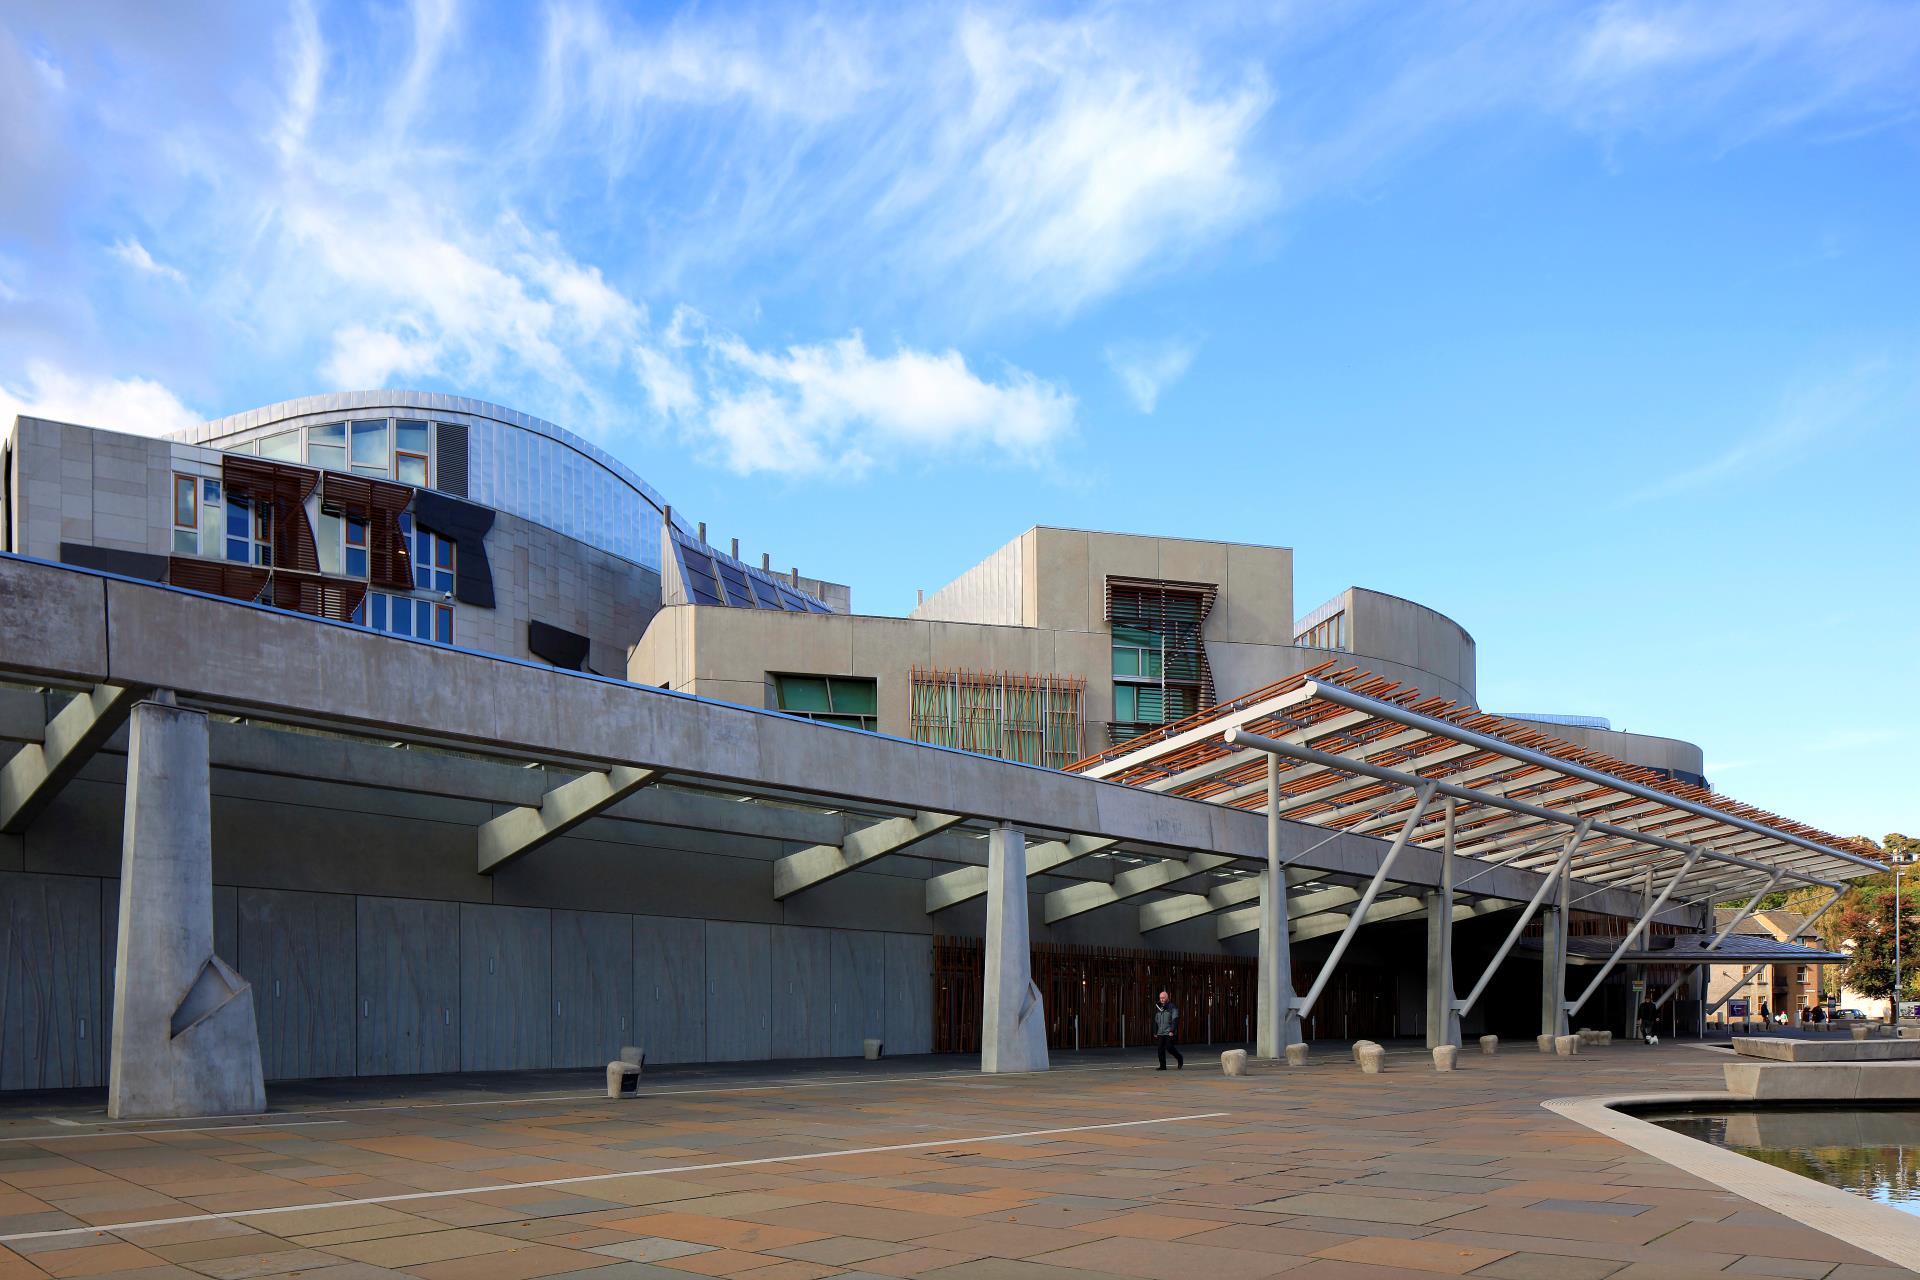 A view of the front of the Scottish Parliament building